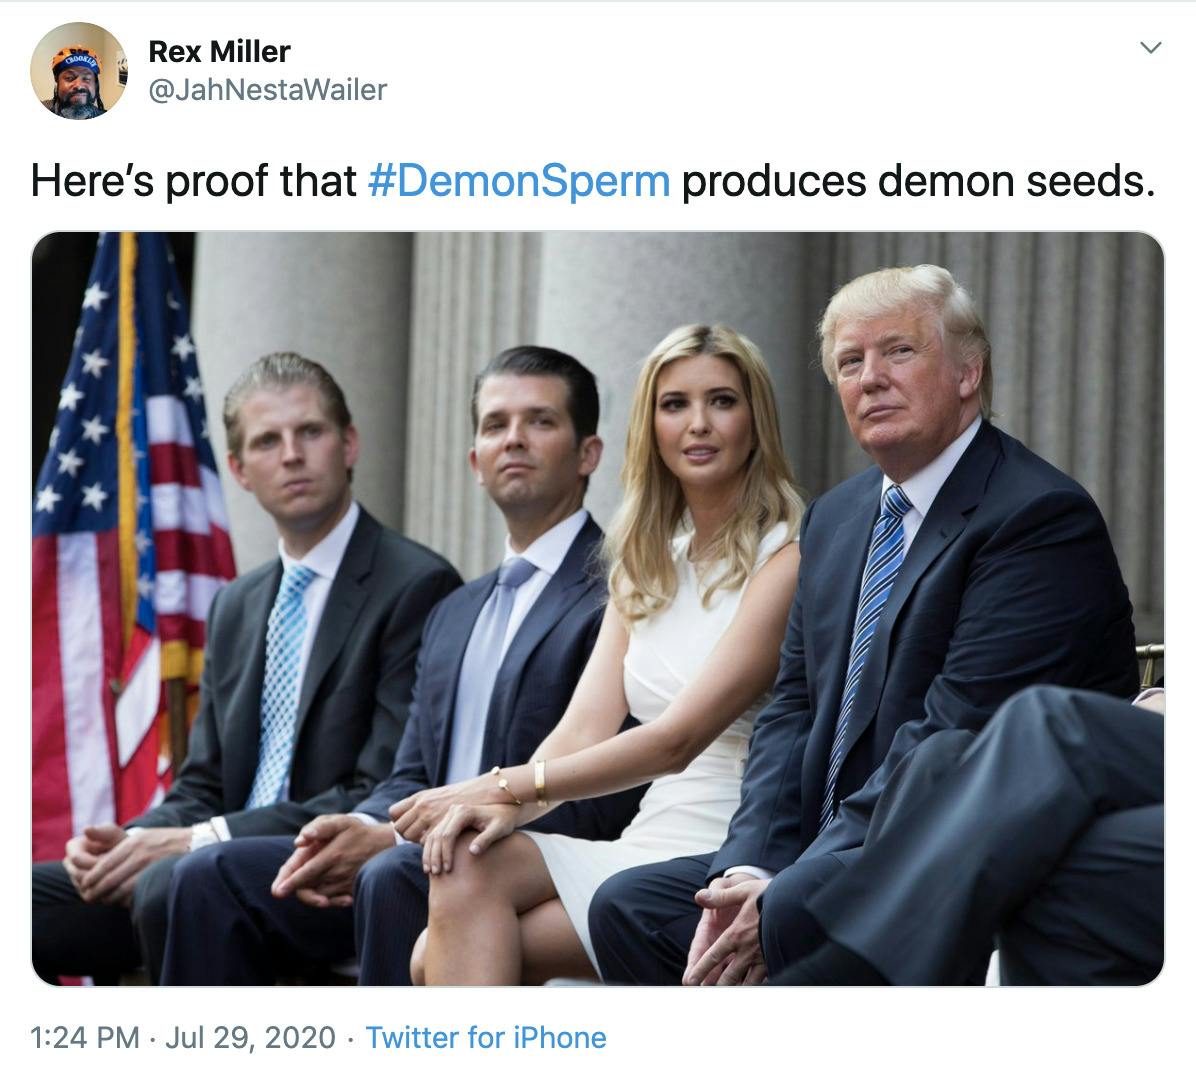 "Here’s proof that #DemonSperm produces demon seeds." image of Trumo and his children